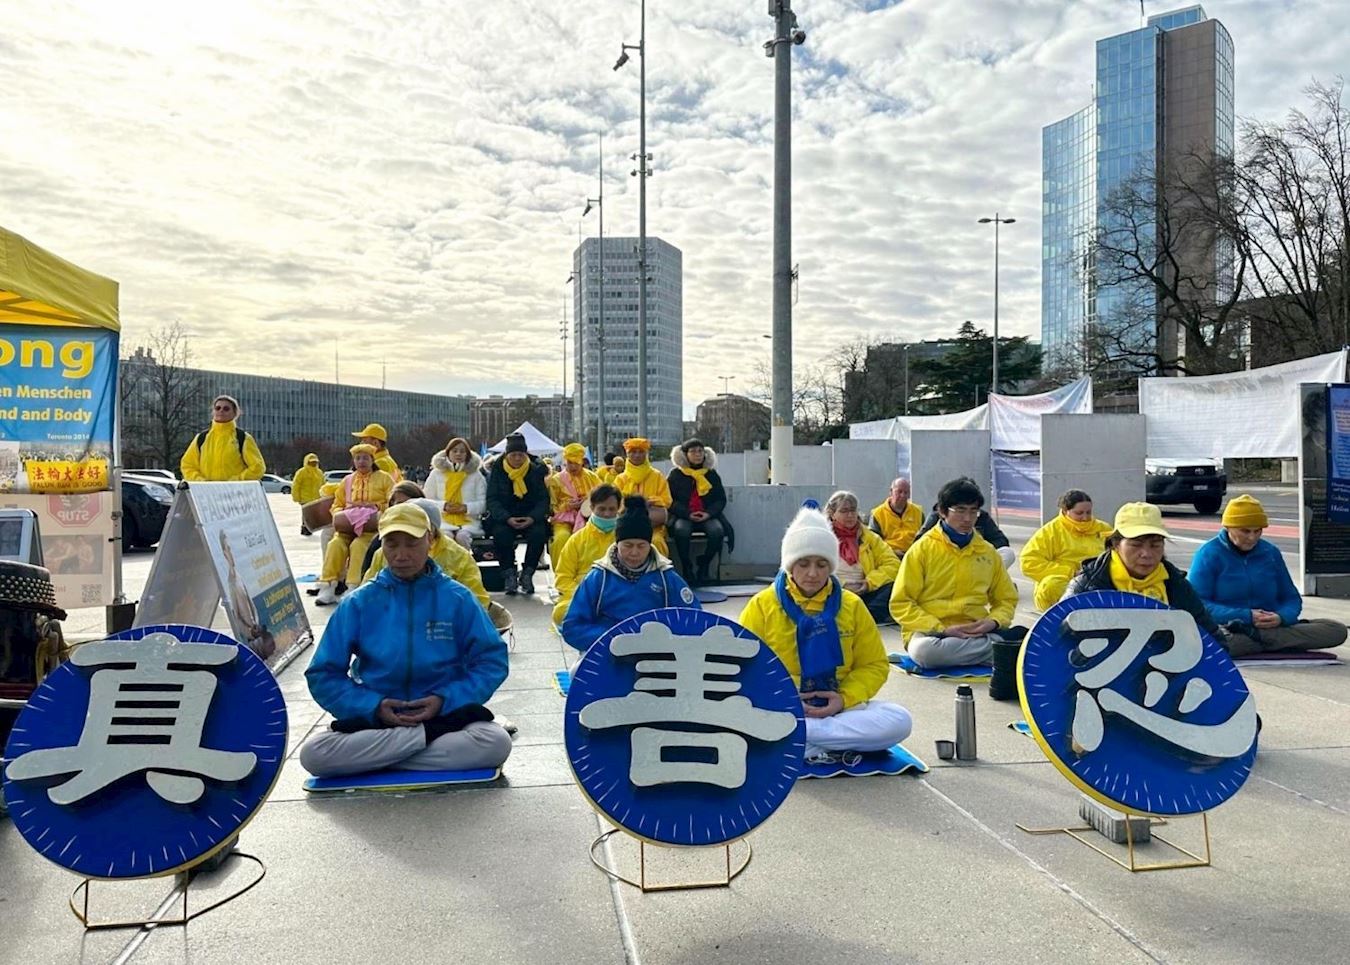 Image for article Geneva, Switzerland: Calling for an End to the Persecution of Falun Gong at the UN Human Rights Council Meeting